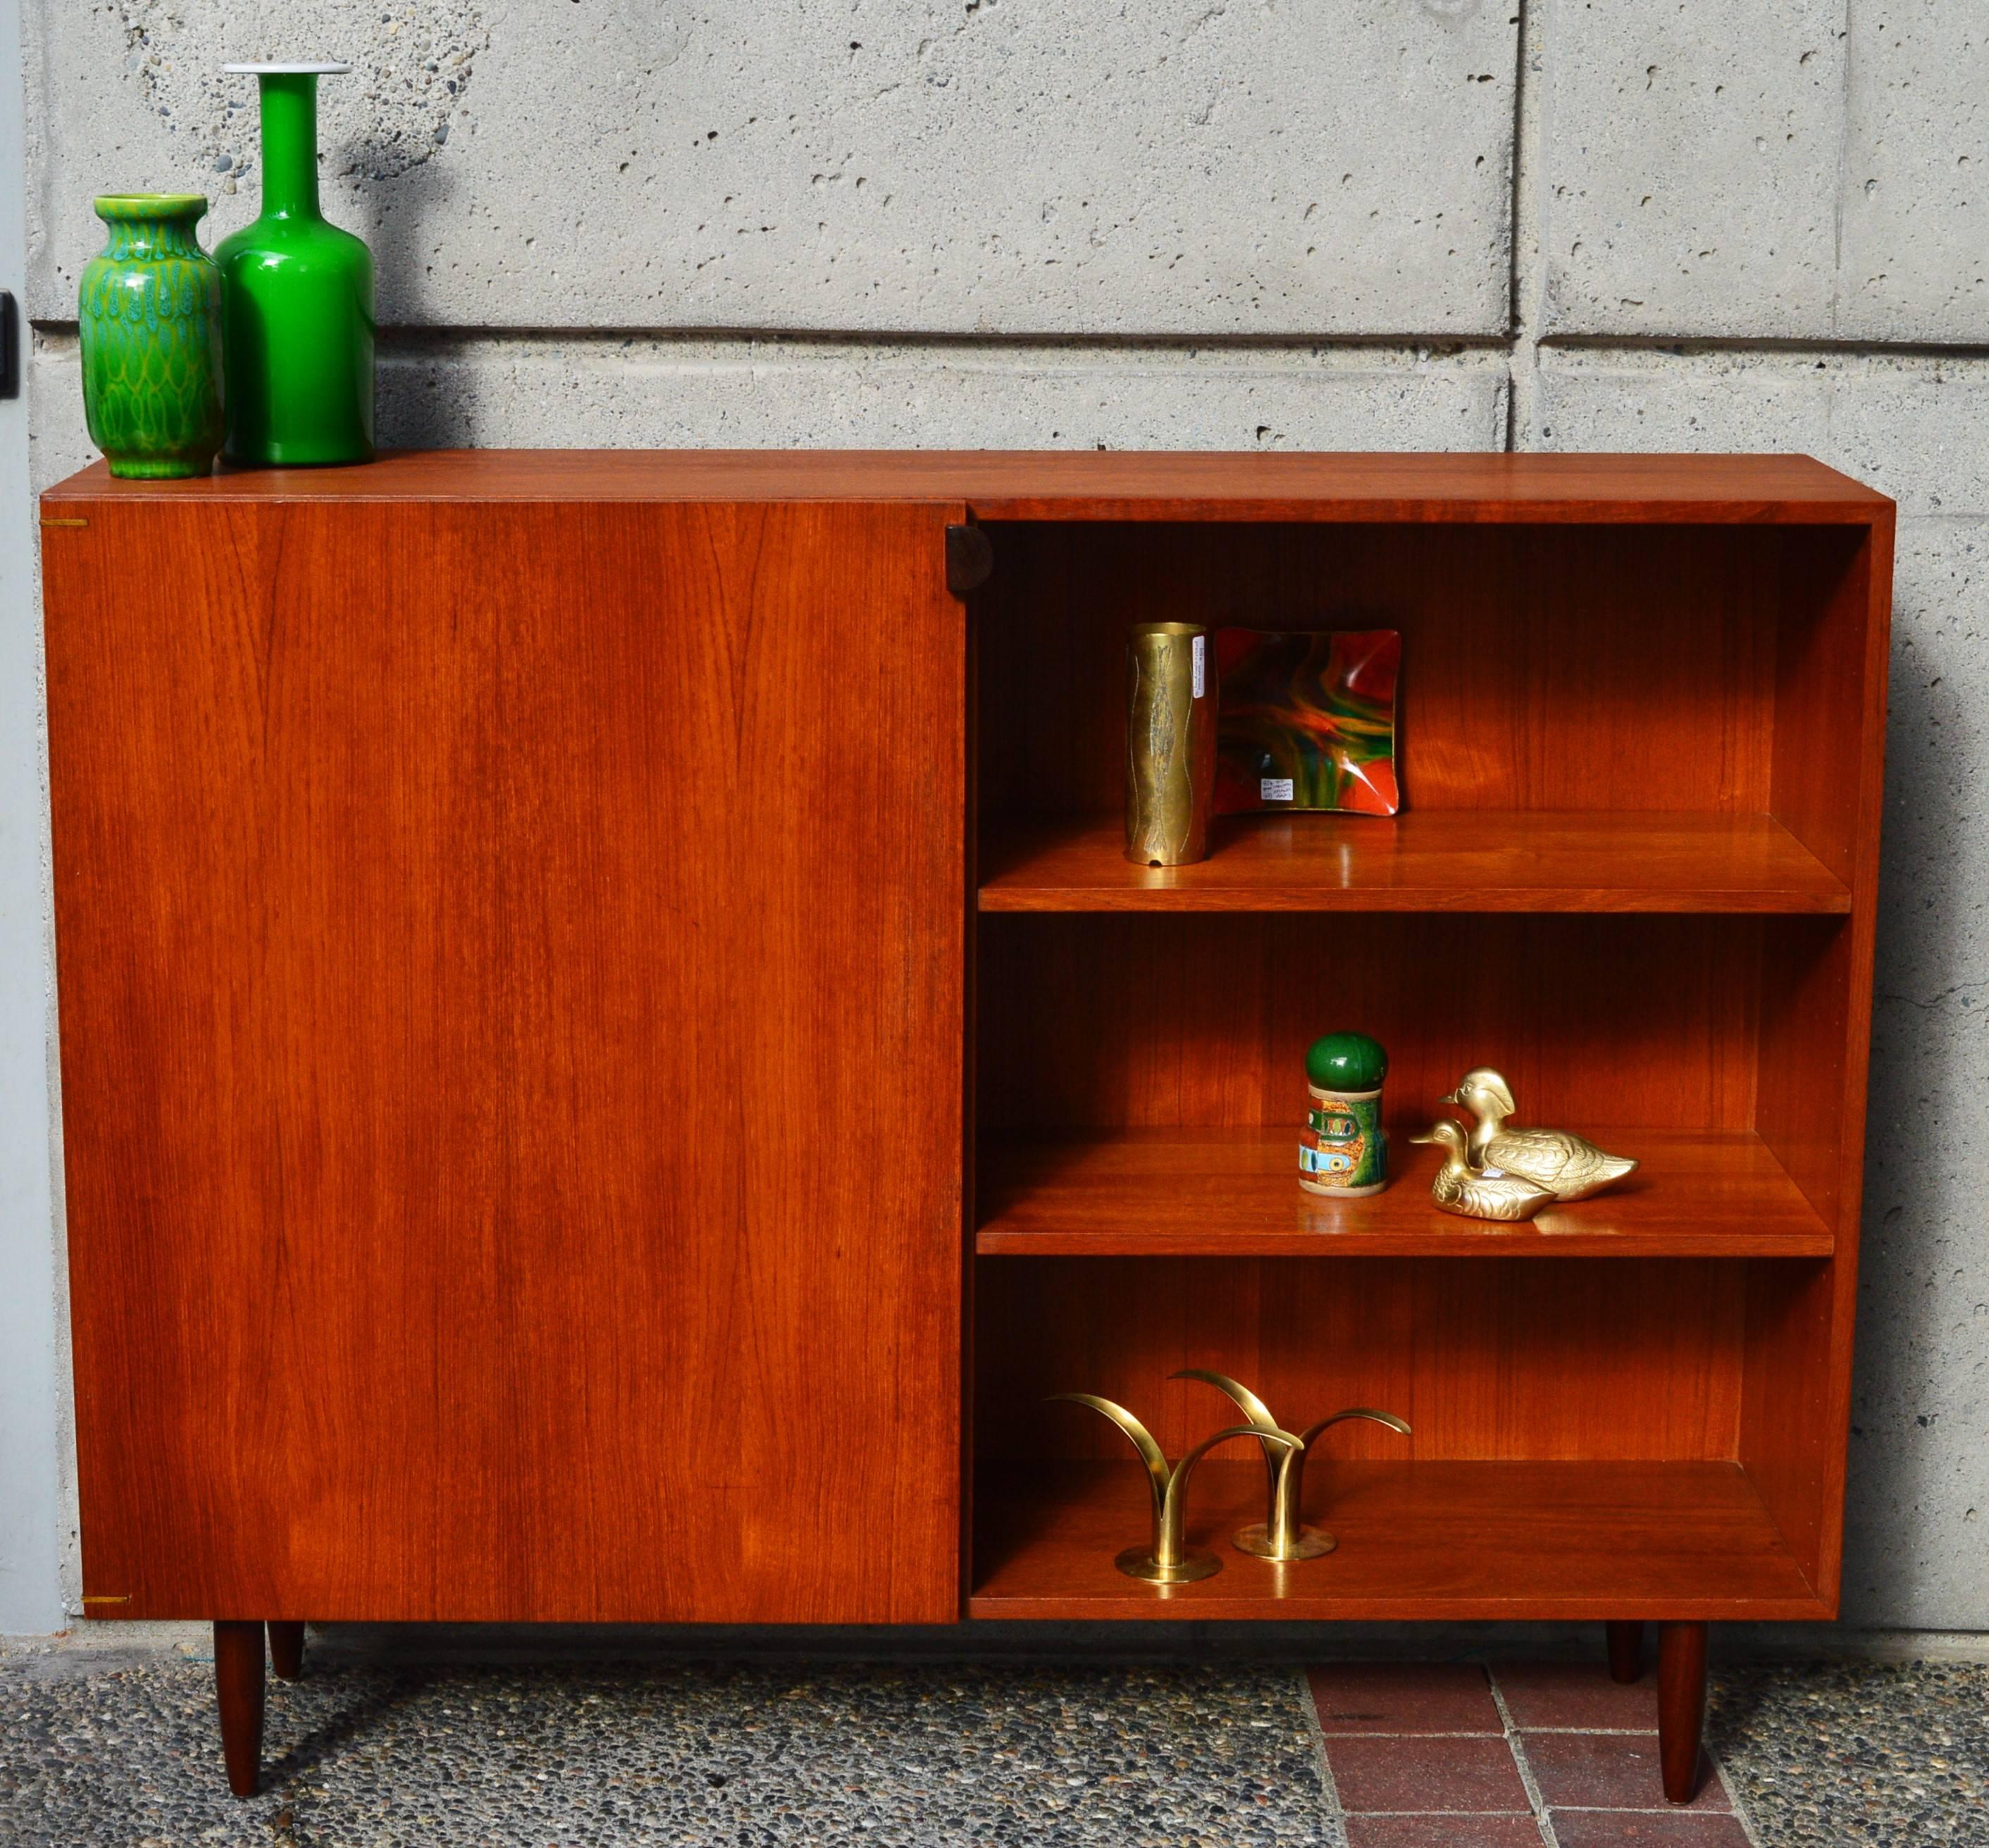 This rare sized Danish modern teak quality cabinet was designed by Kai Kristiansen for Feldballes Mobelfabrik and features a narrow profile, four adjustable shelves - with one side open and one side hidden behind a door. The door has a carved